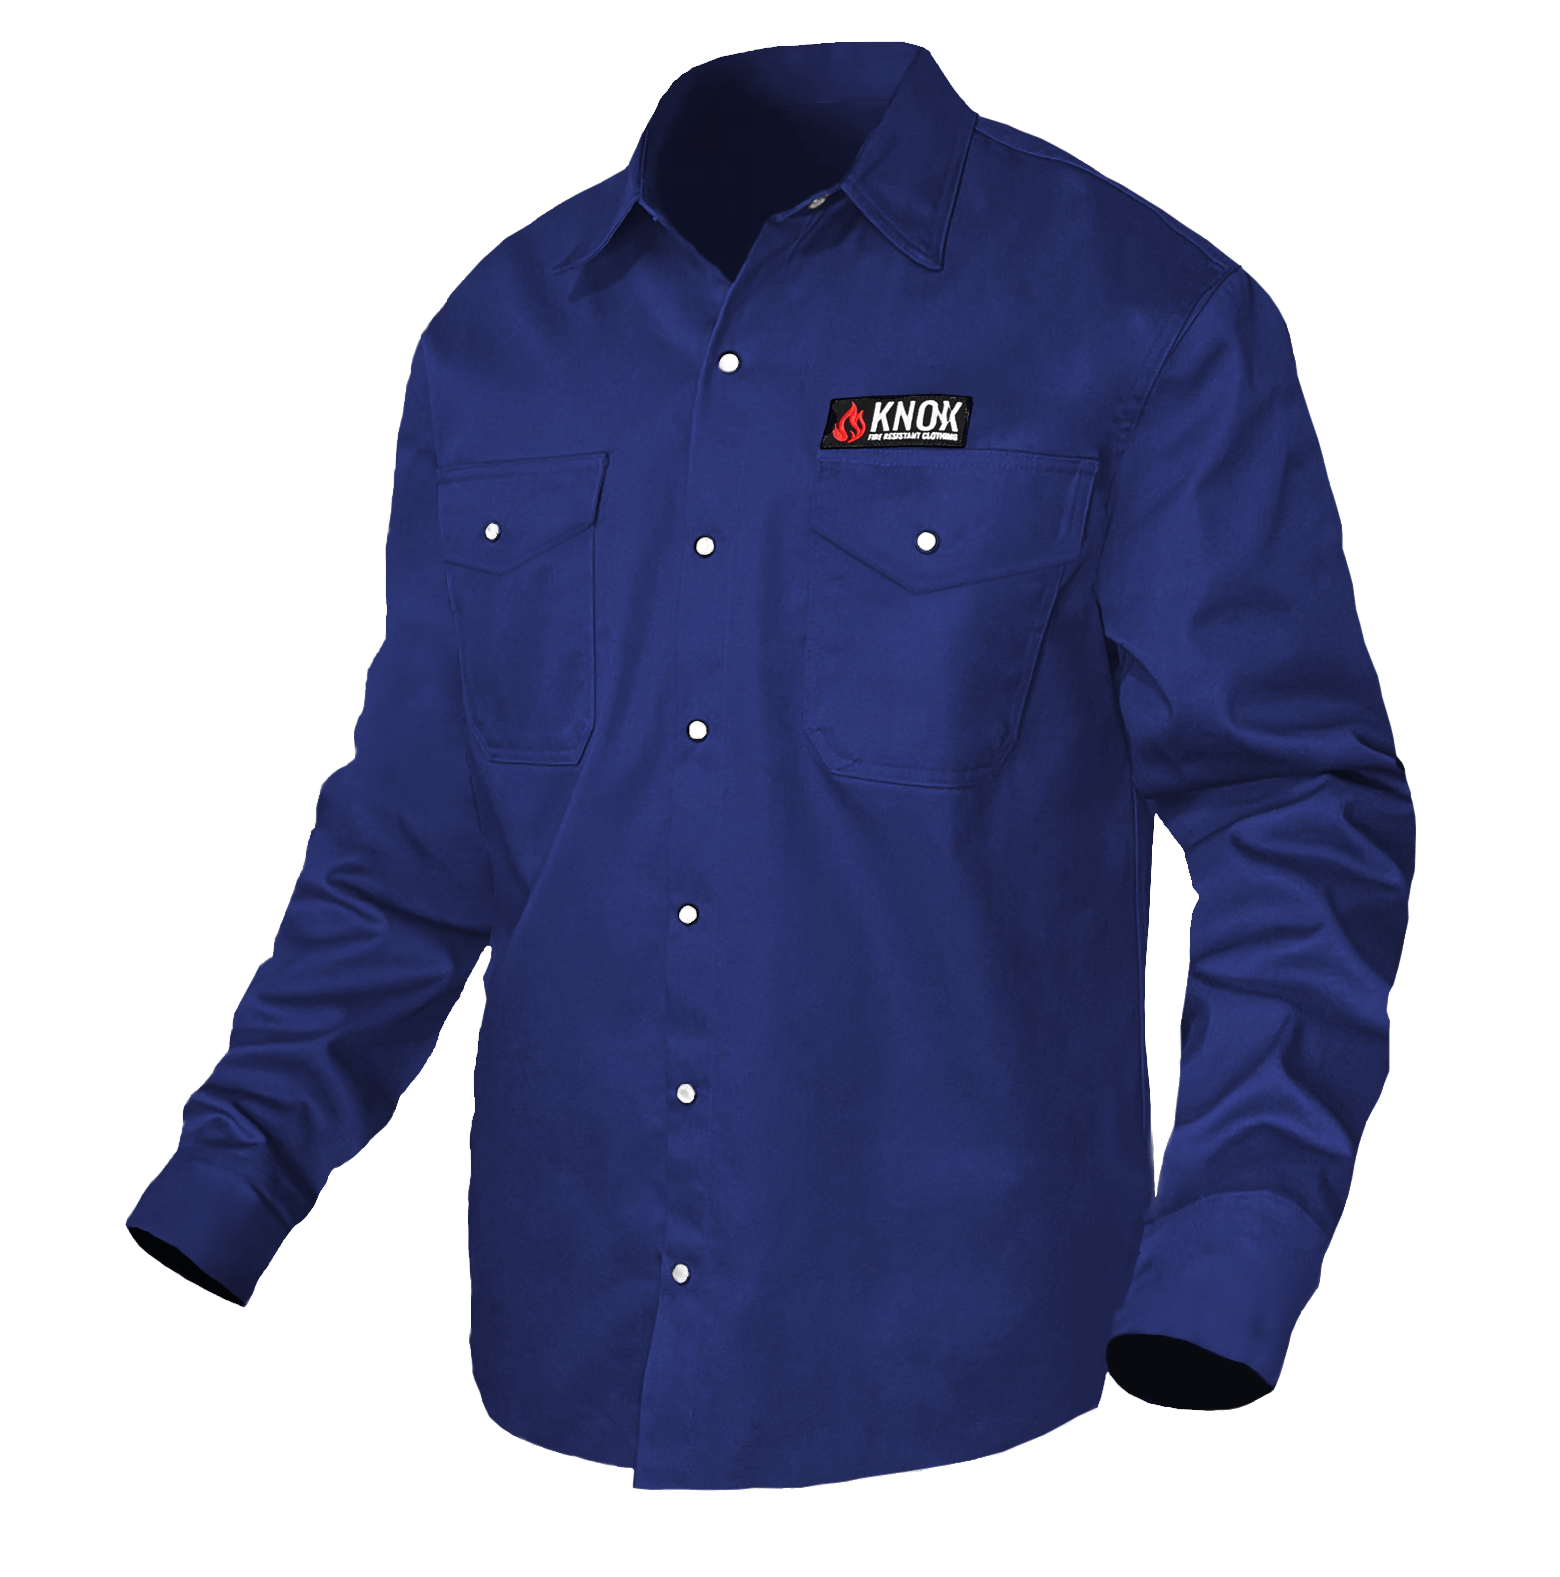 Knox Incorporated Apparel & Accessories Knox FR Shirt Navy Blue With Pearl Snap Buttons